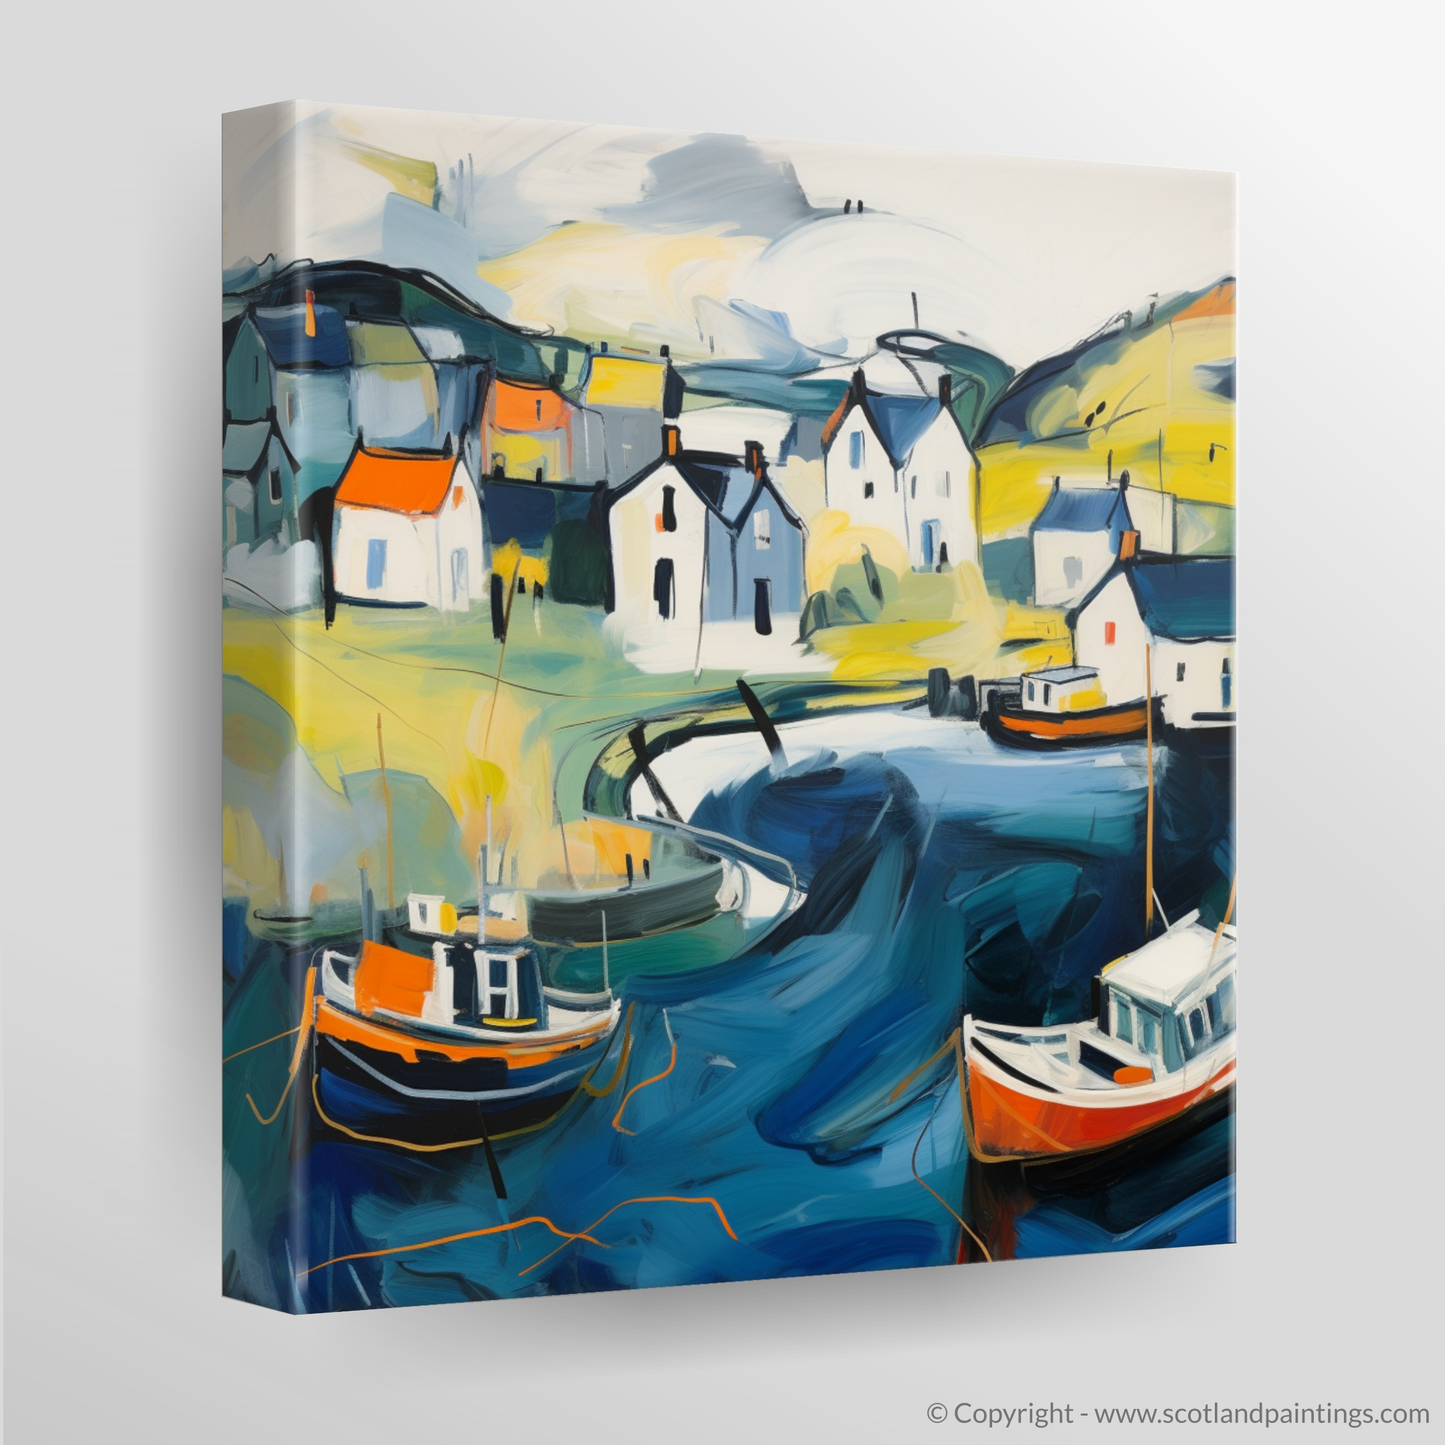 Harbour Hues: An Abstract Ode to Port Ellen